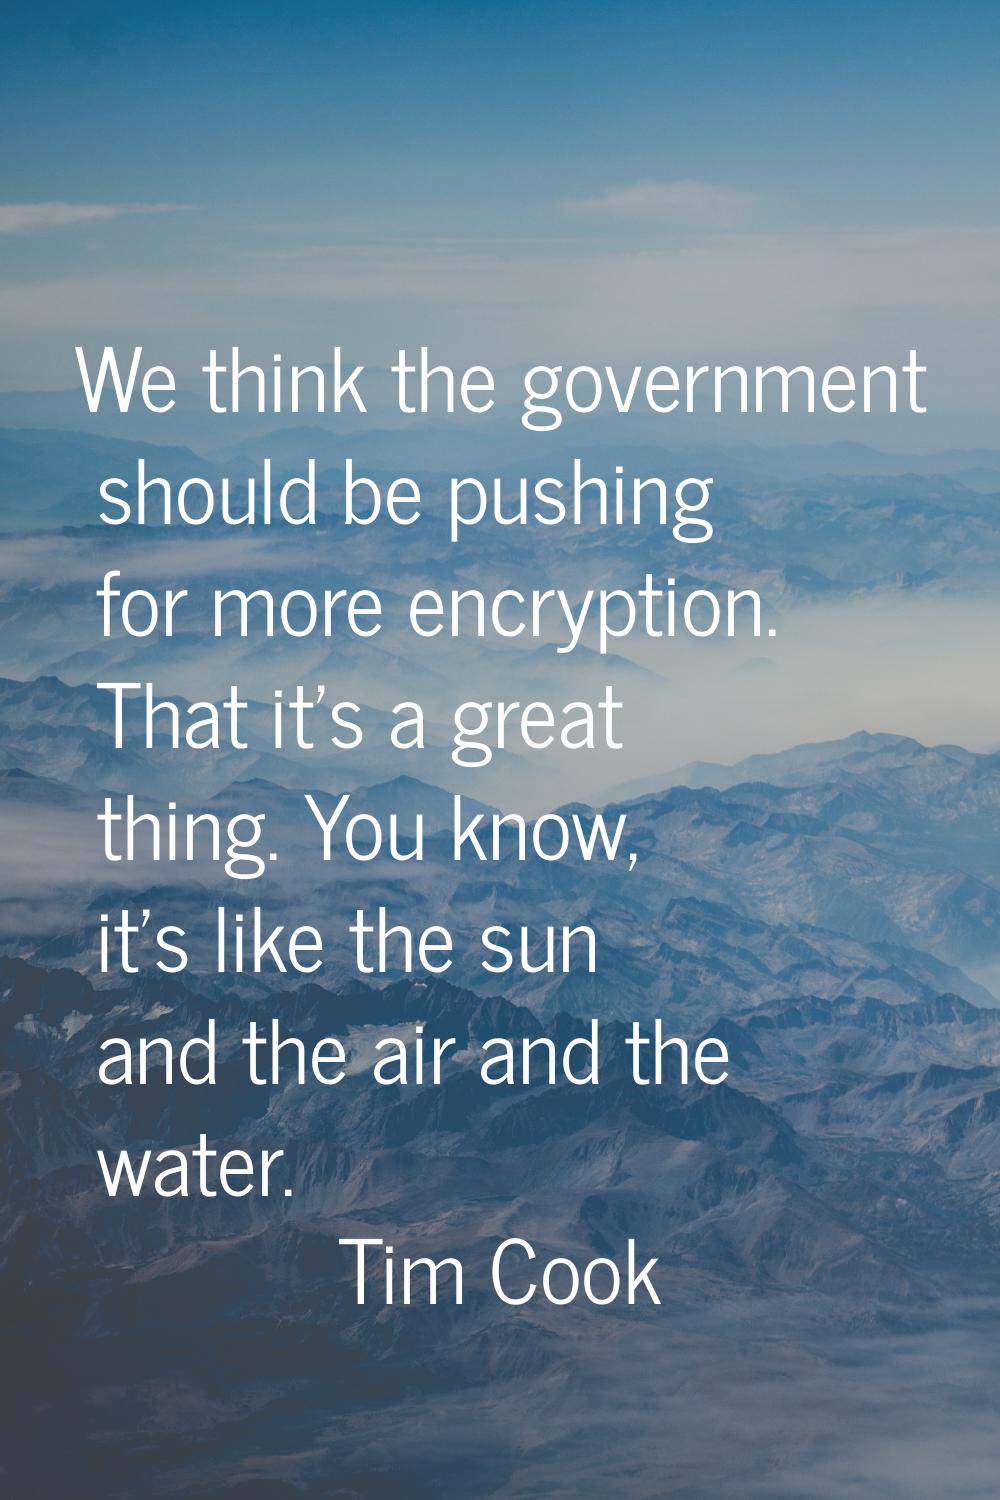 We think the government should be pushing for more encryption. That it's a great thing. You know, i